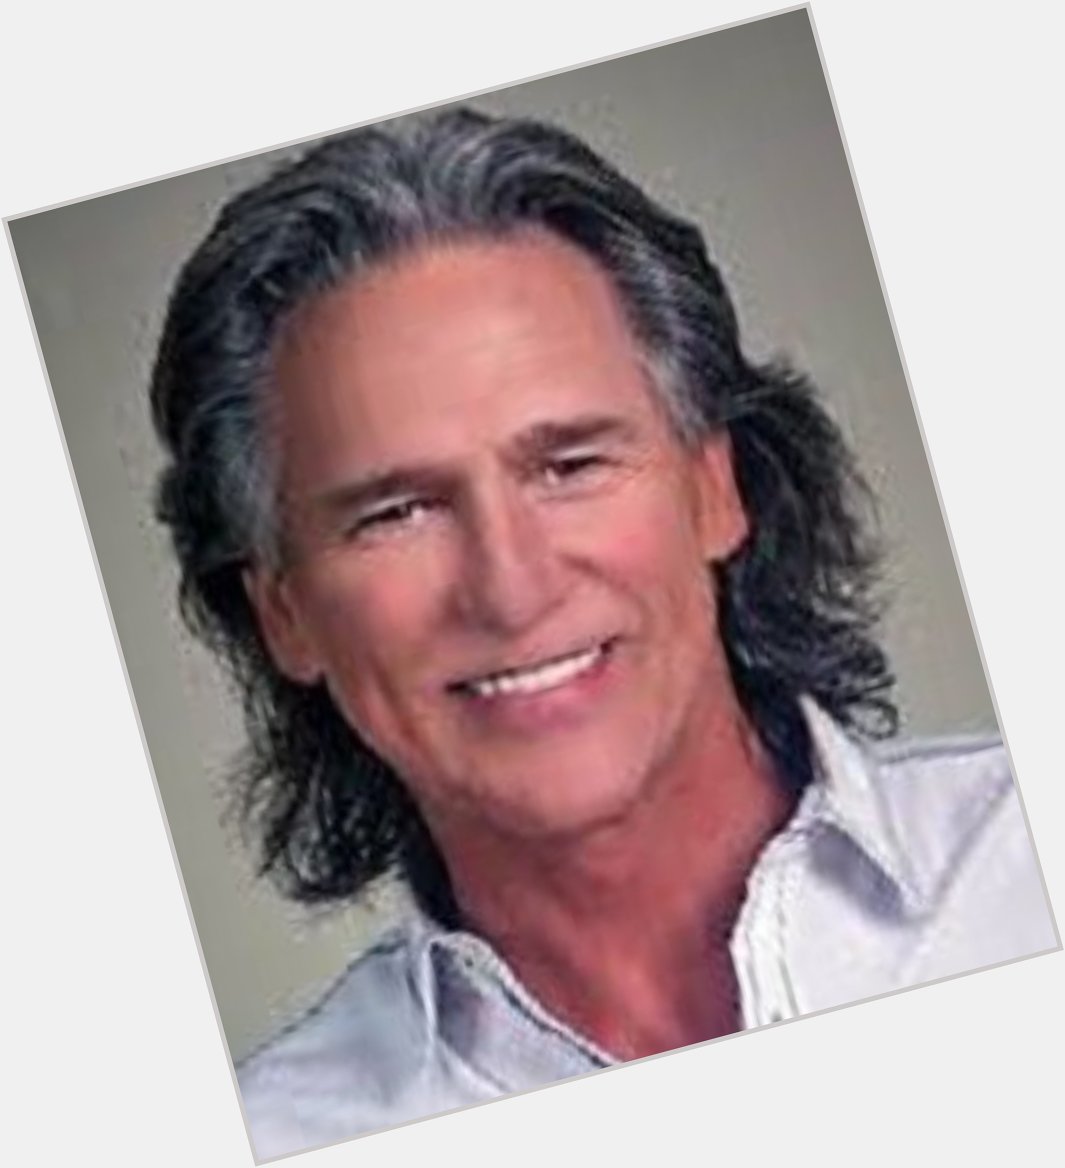 Happy Birthday to Billy Dean, 57 today.   